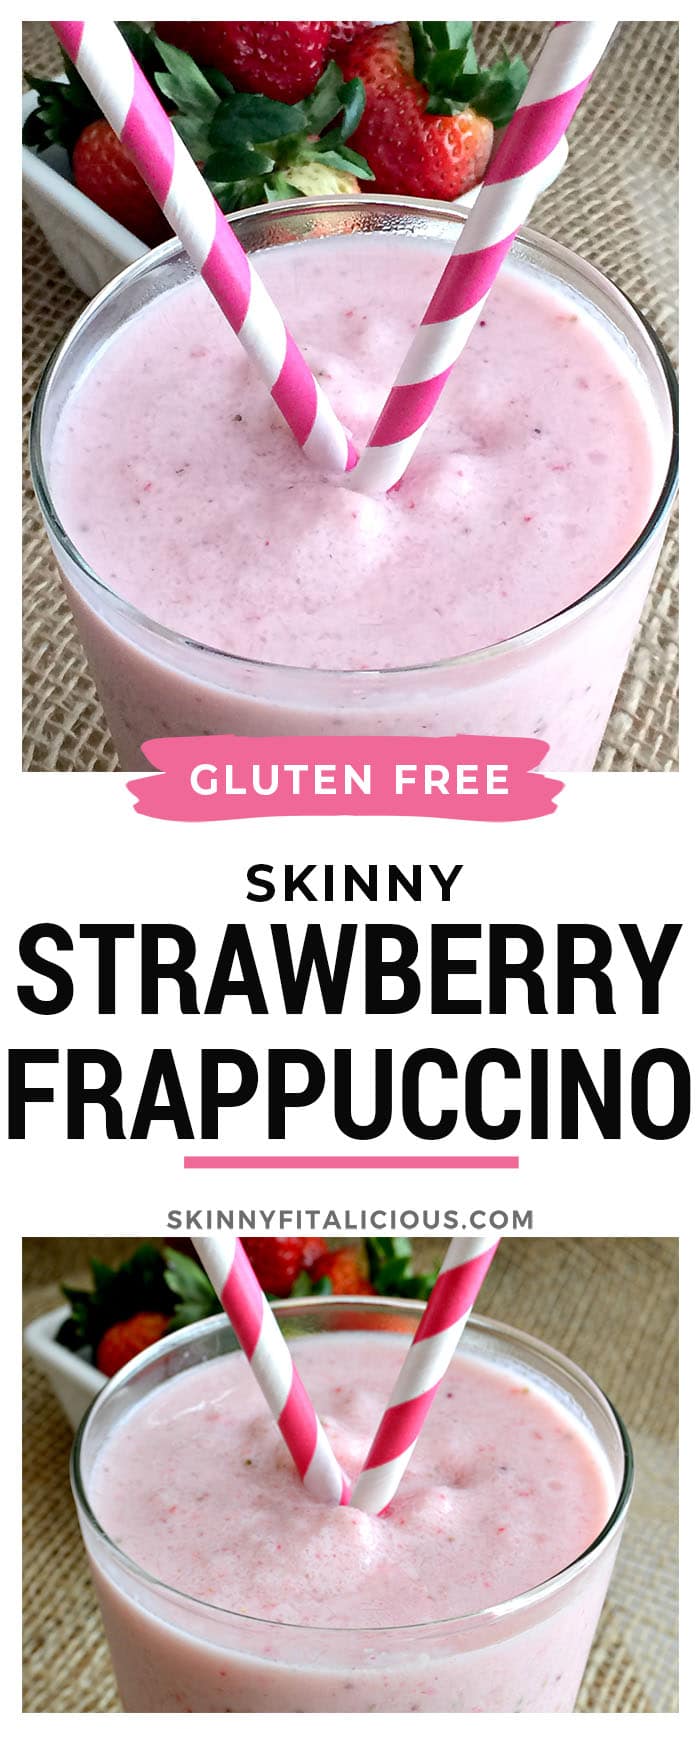 An ice-cold creaminess, this Skinny Strawberry Frappuccino is made high protein with 3 wholesome ingredients. A Starbucks knock-off with half the calories. 